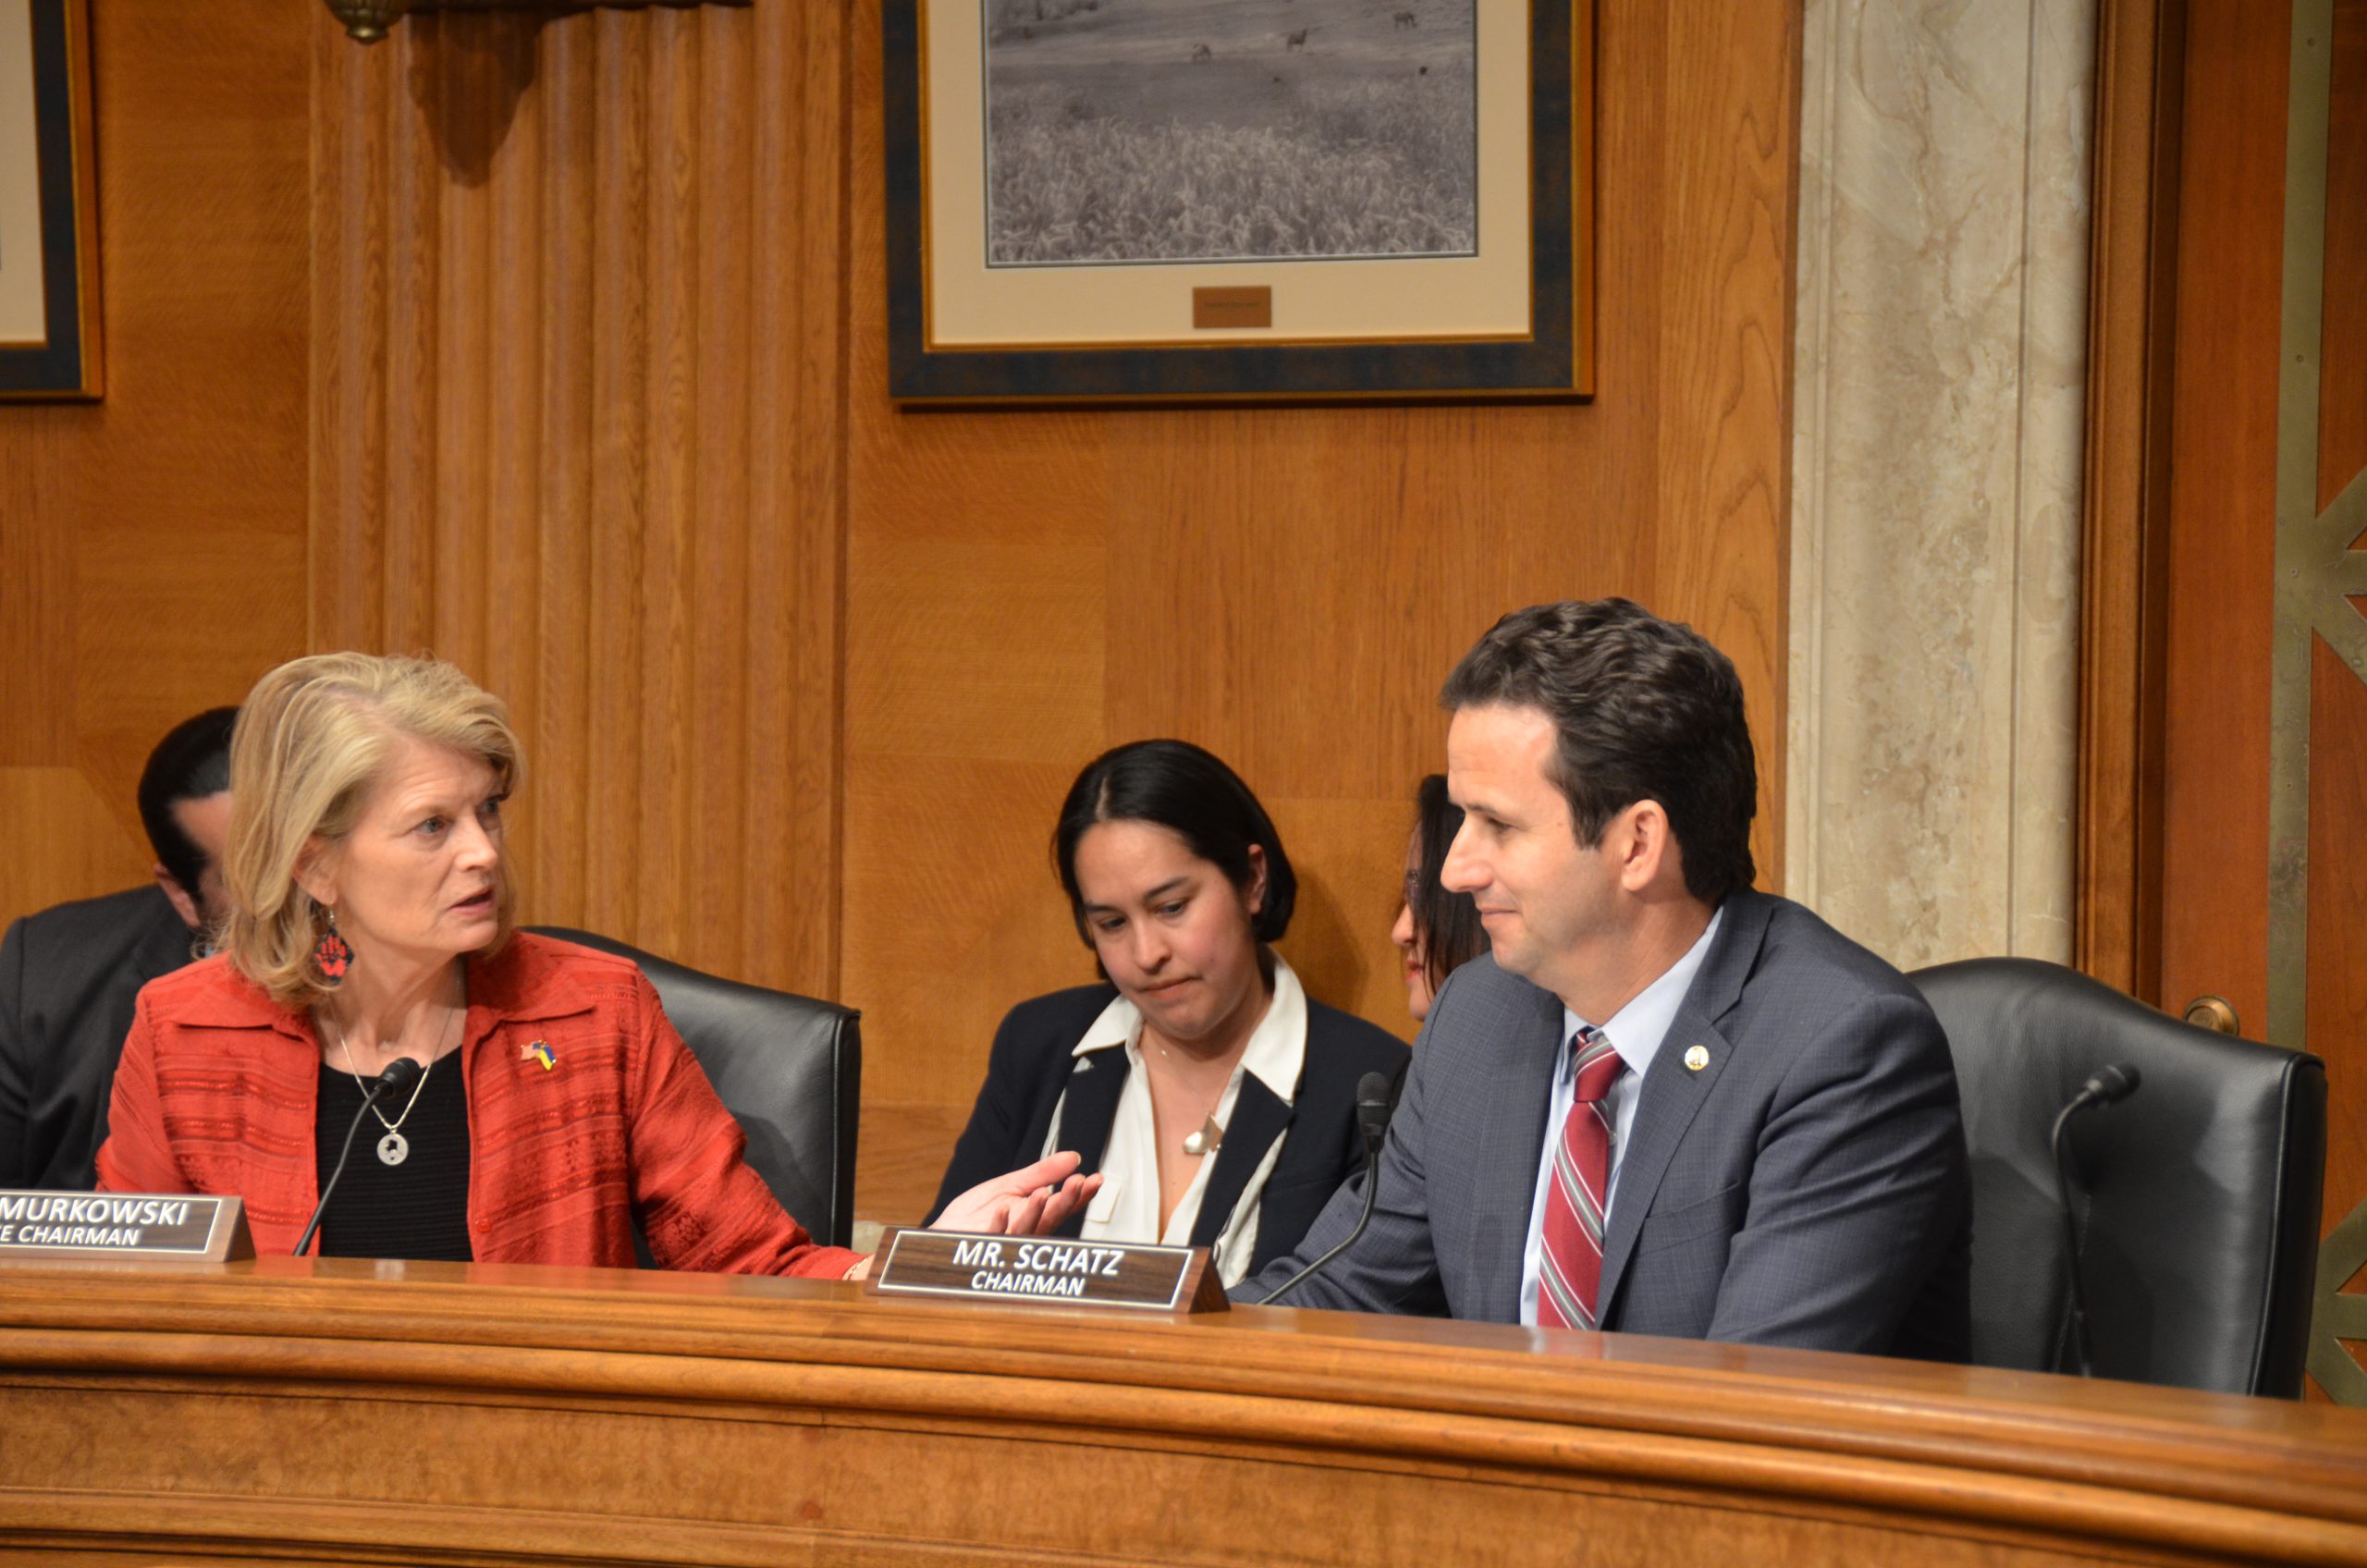 “Dedicated, long-serving leadership at the Indian Health Service is vital to fulfilling its mission,” said Sen. Brian Schatz (D-Hawaii), chair of the Senate Committee on Indian Affairs.